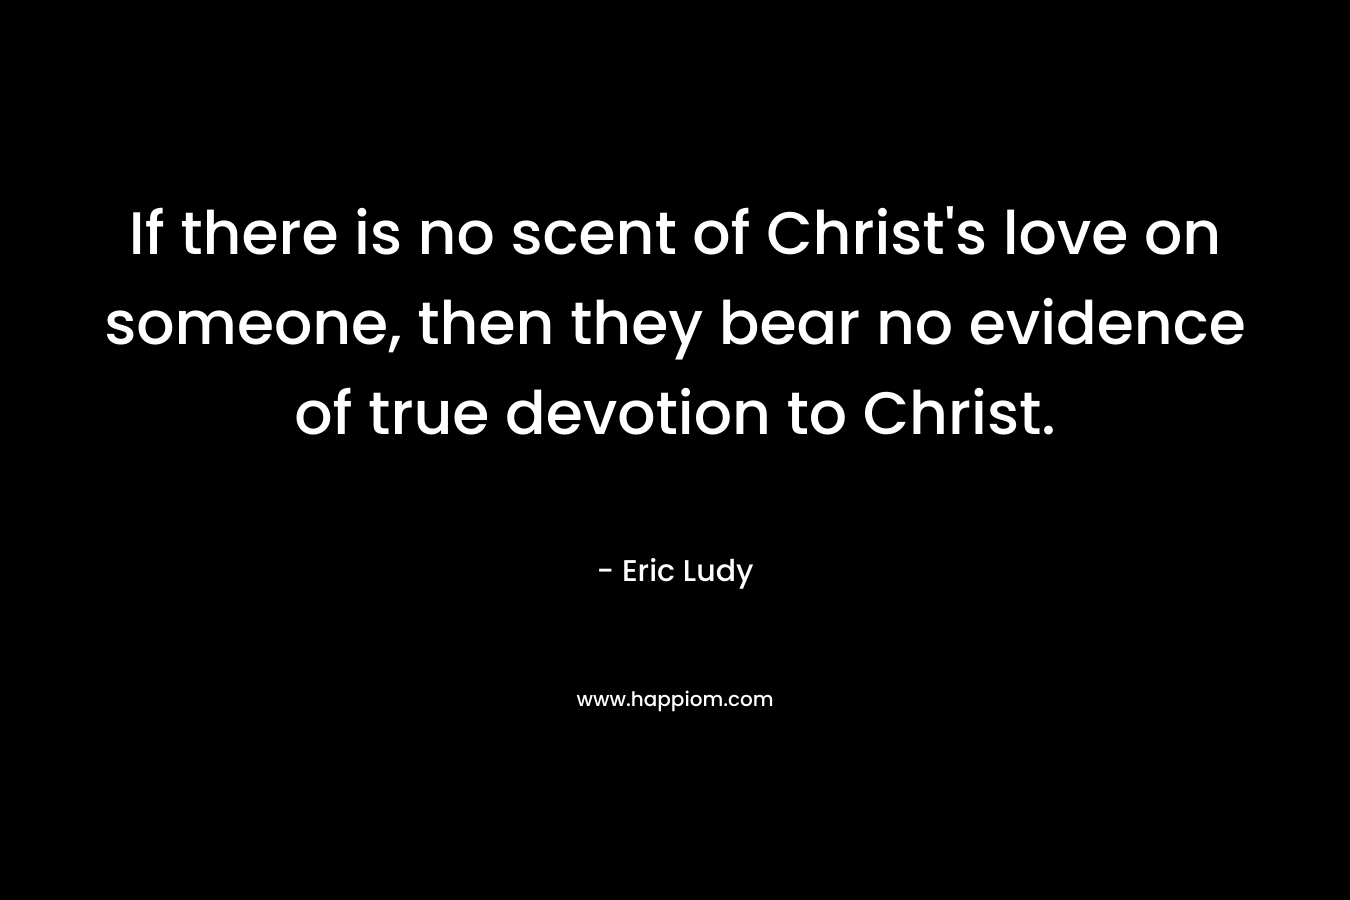 If there is no scent of Christ’s love on someone, then they bear no evidence of true devotion to Christ. – Eric Ludy